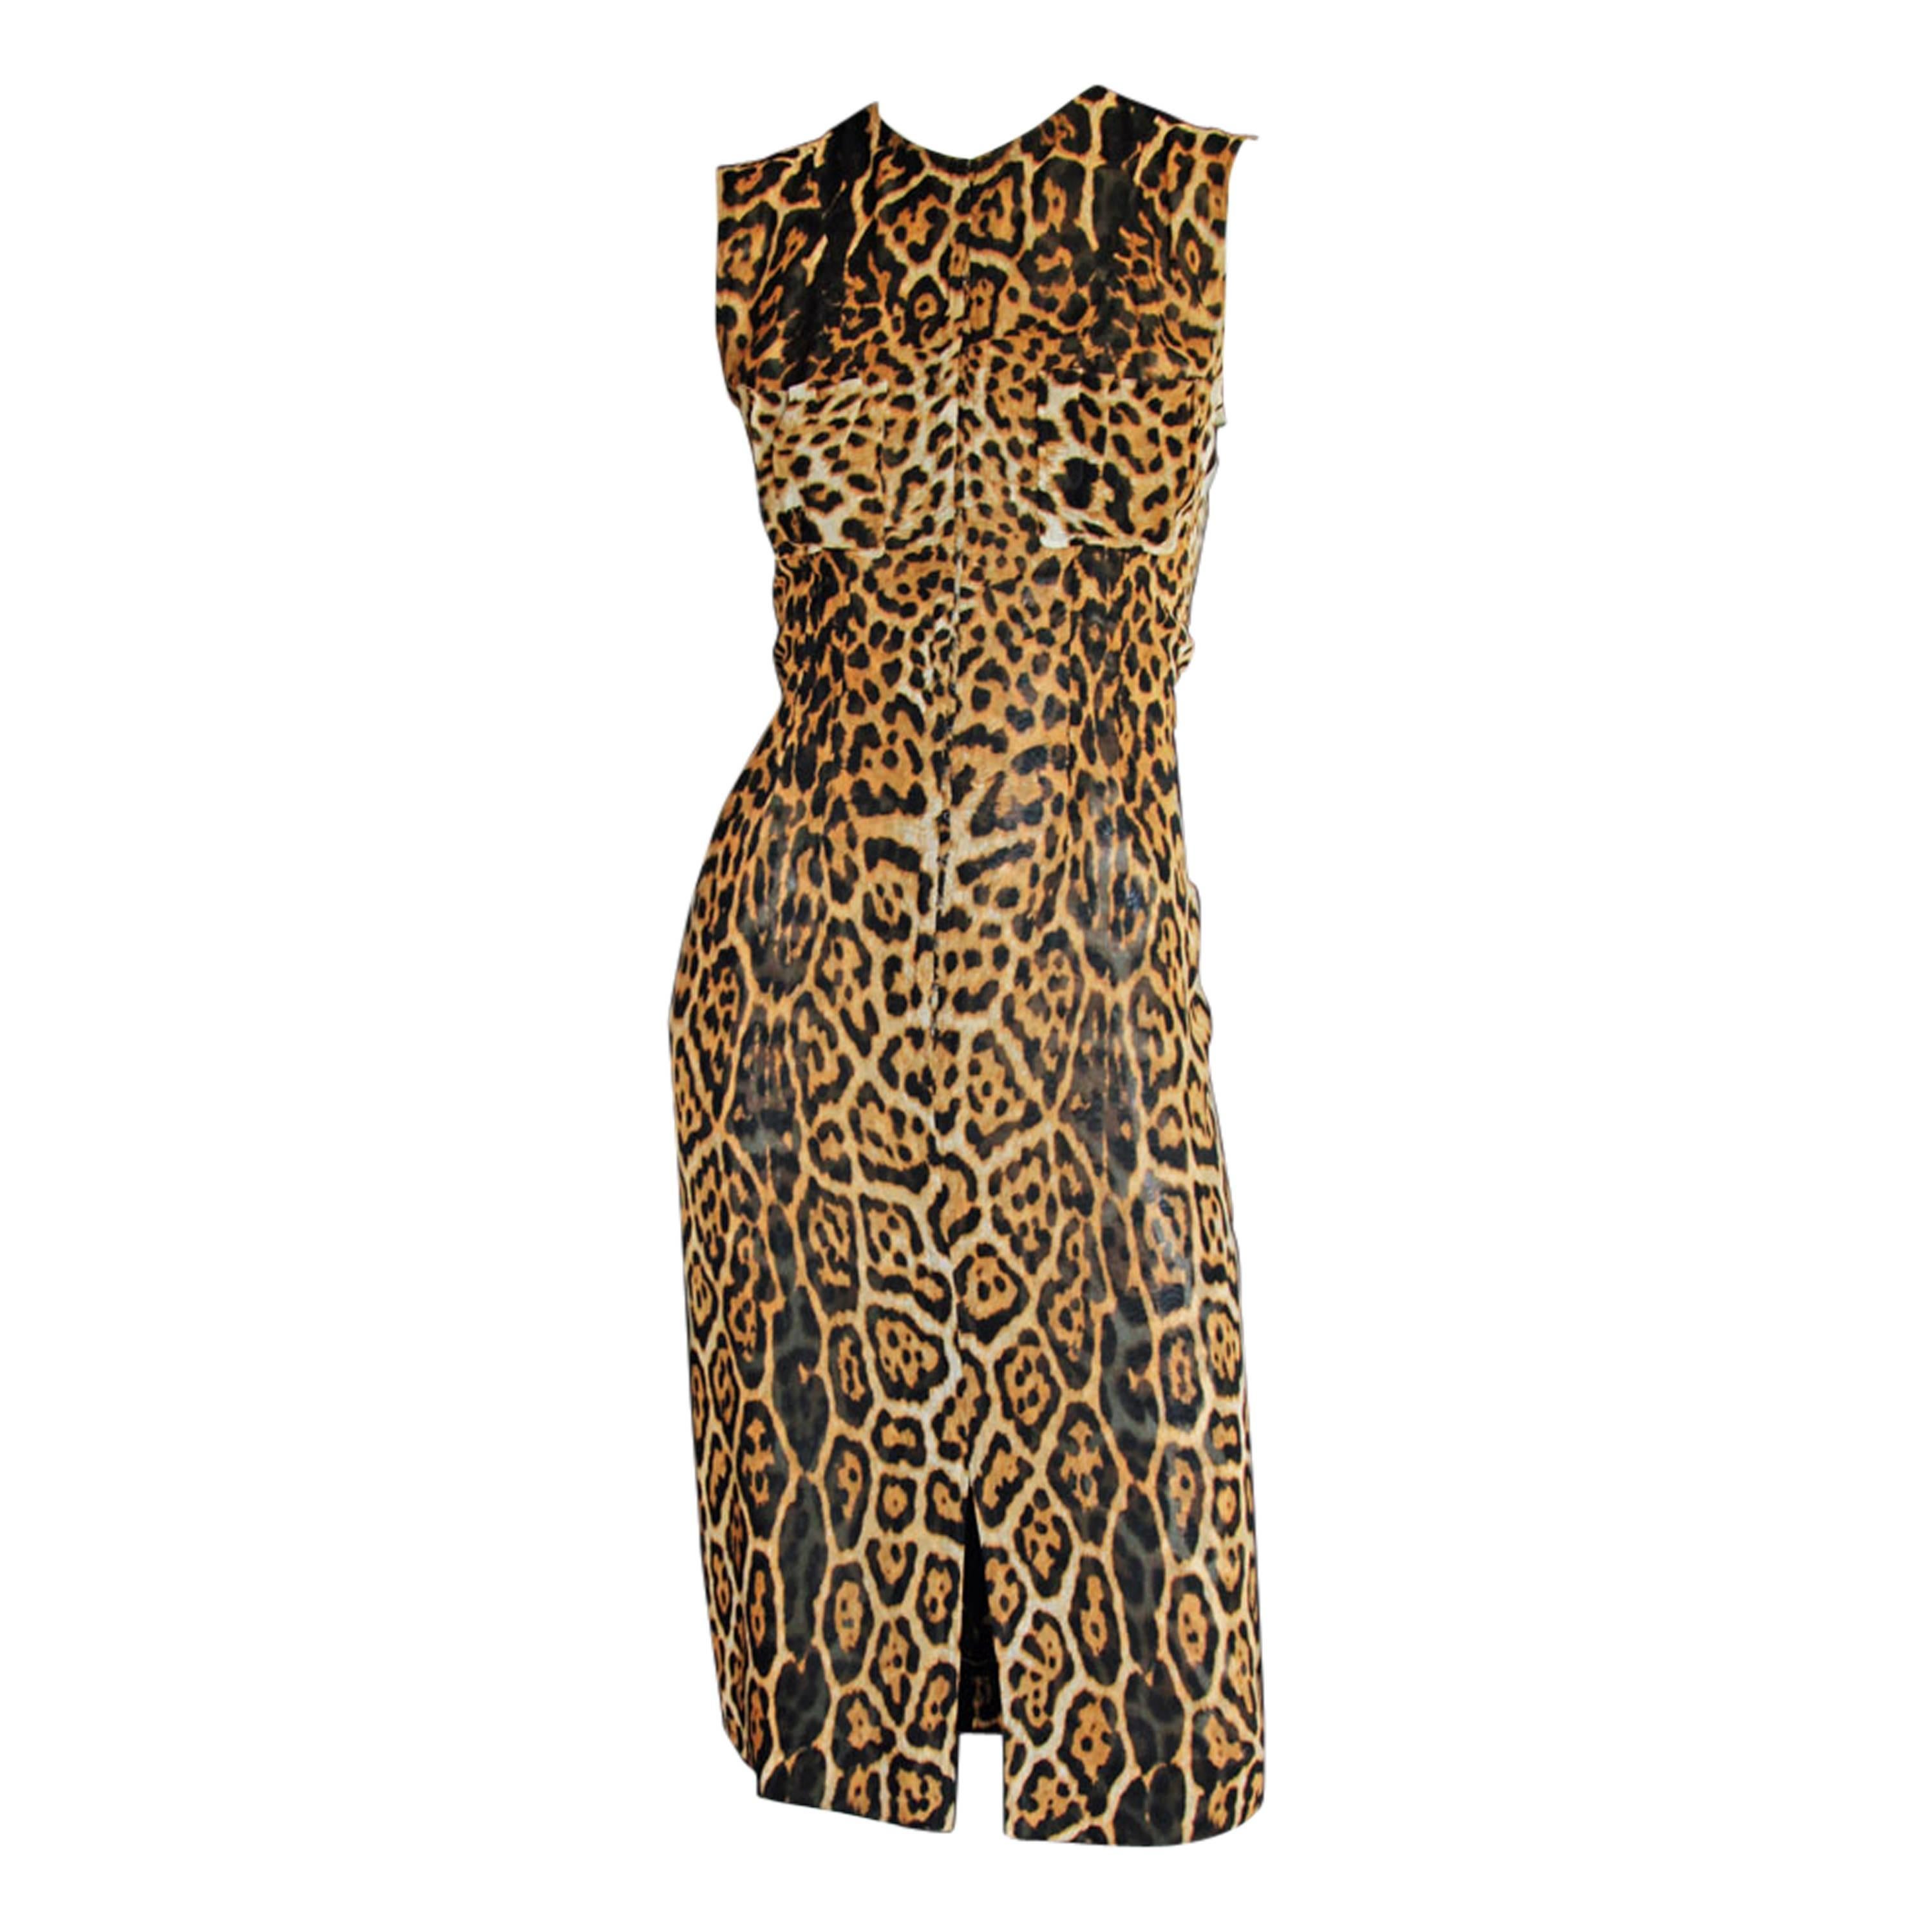 Free Shipping: Gorgeous Tom Ford YSL Rive Gauche SS2002 Safari Collection Dress!